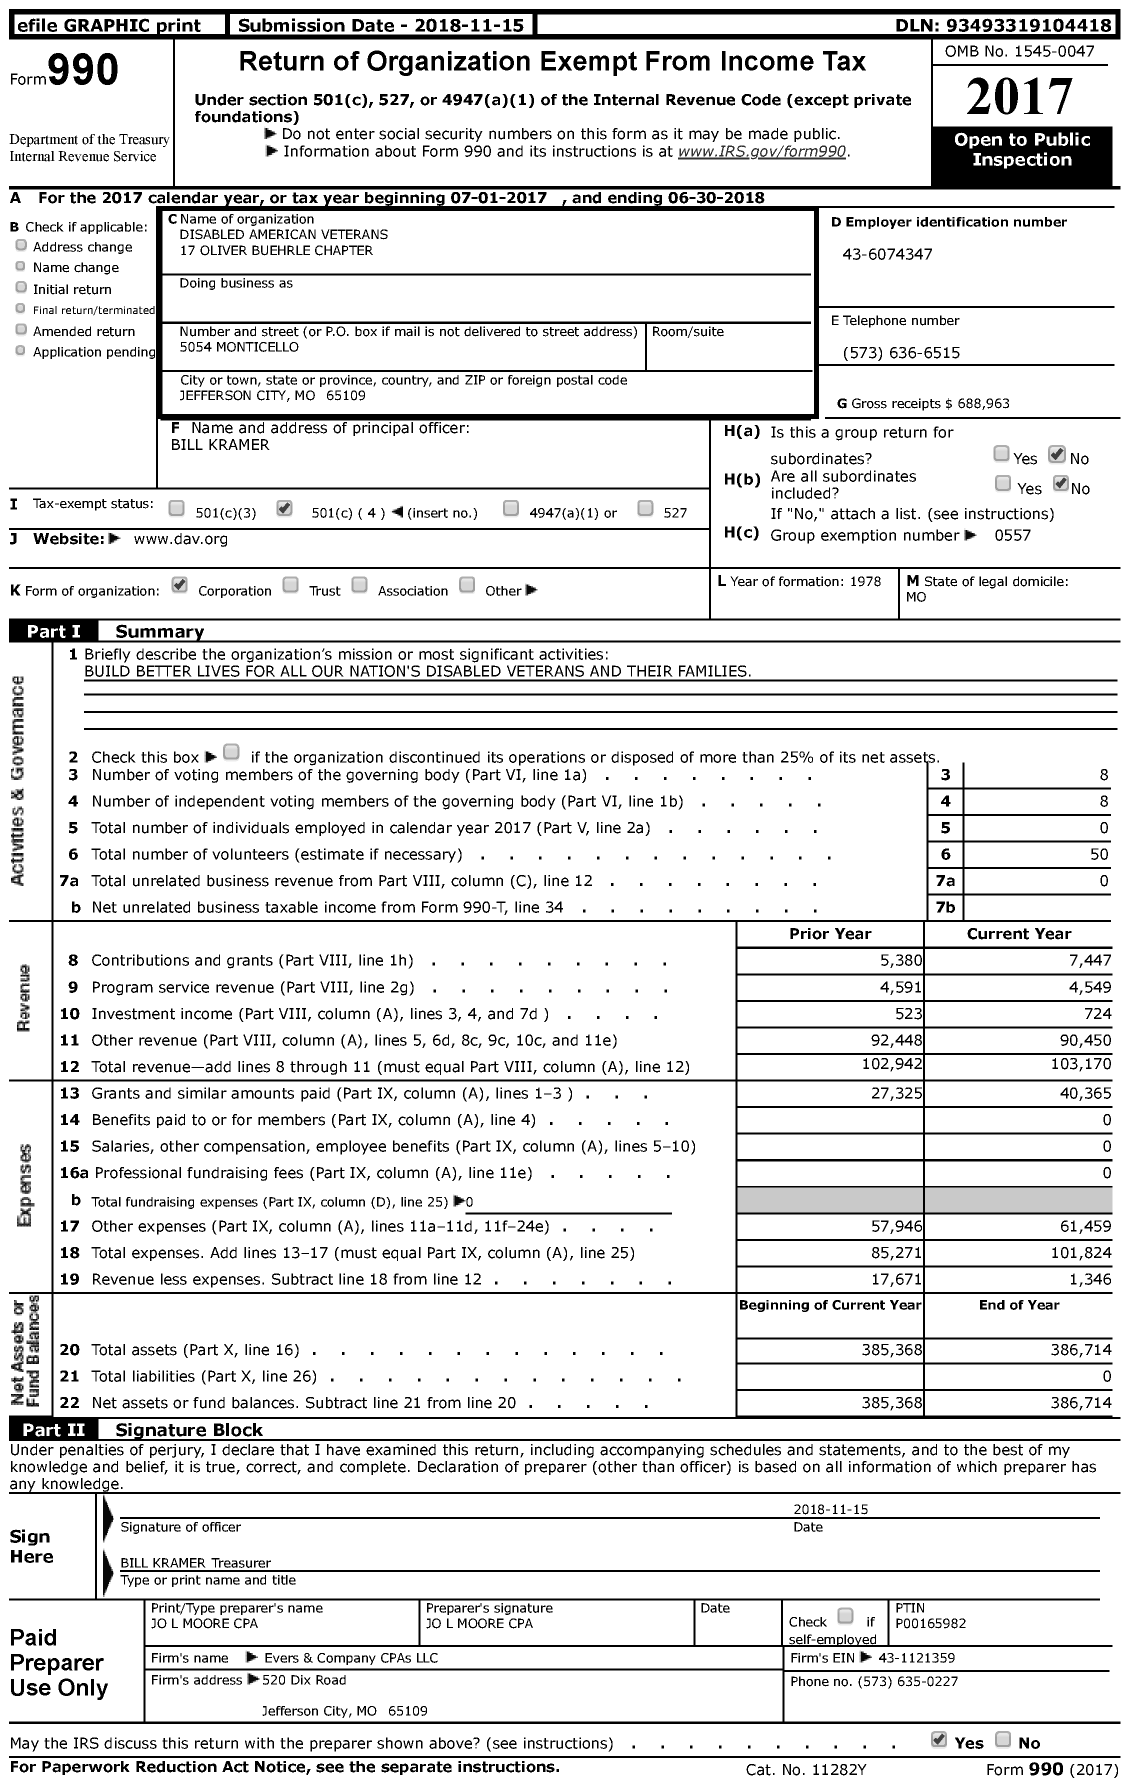 Image of first page of 2017 Form 990 for Disabled American Veterans 17 Oliver Buehrle Chapter